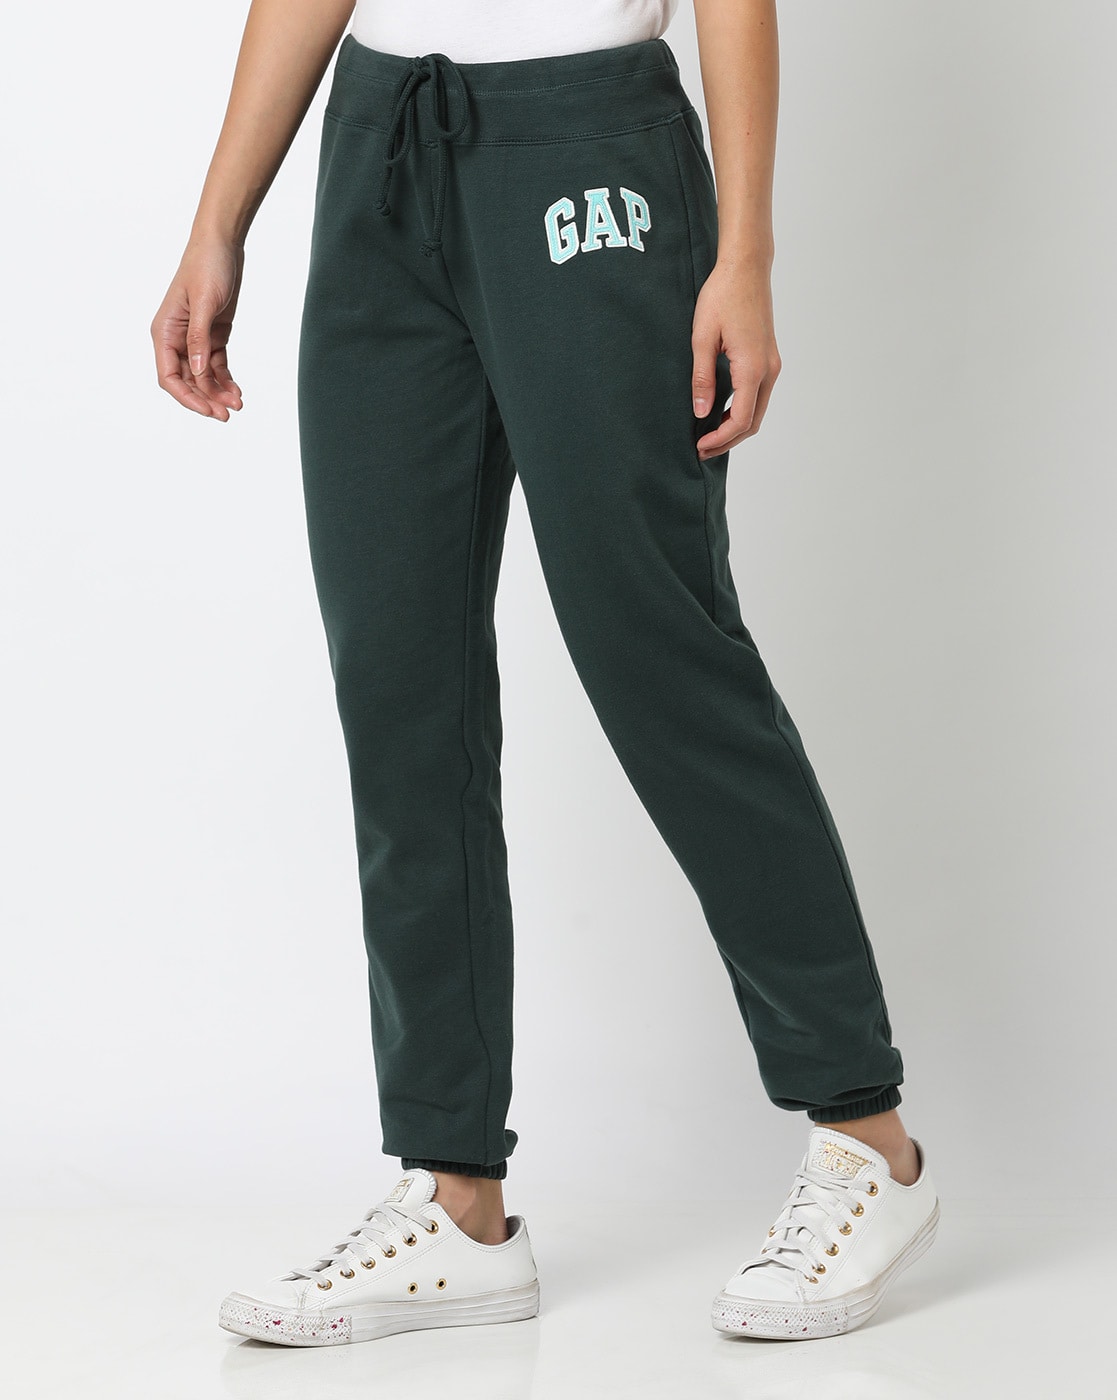 Buy GAP Mens Brown Drawstring Waist Woven Cotton Stretch Joggers | Shoppers  Stop